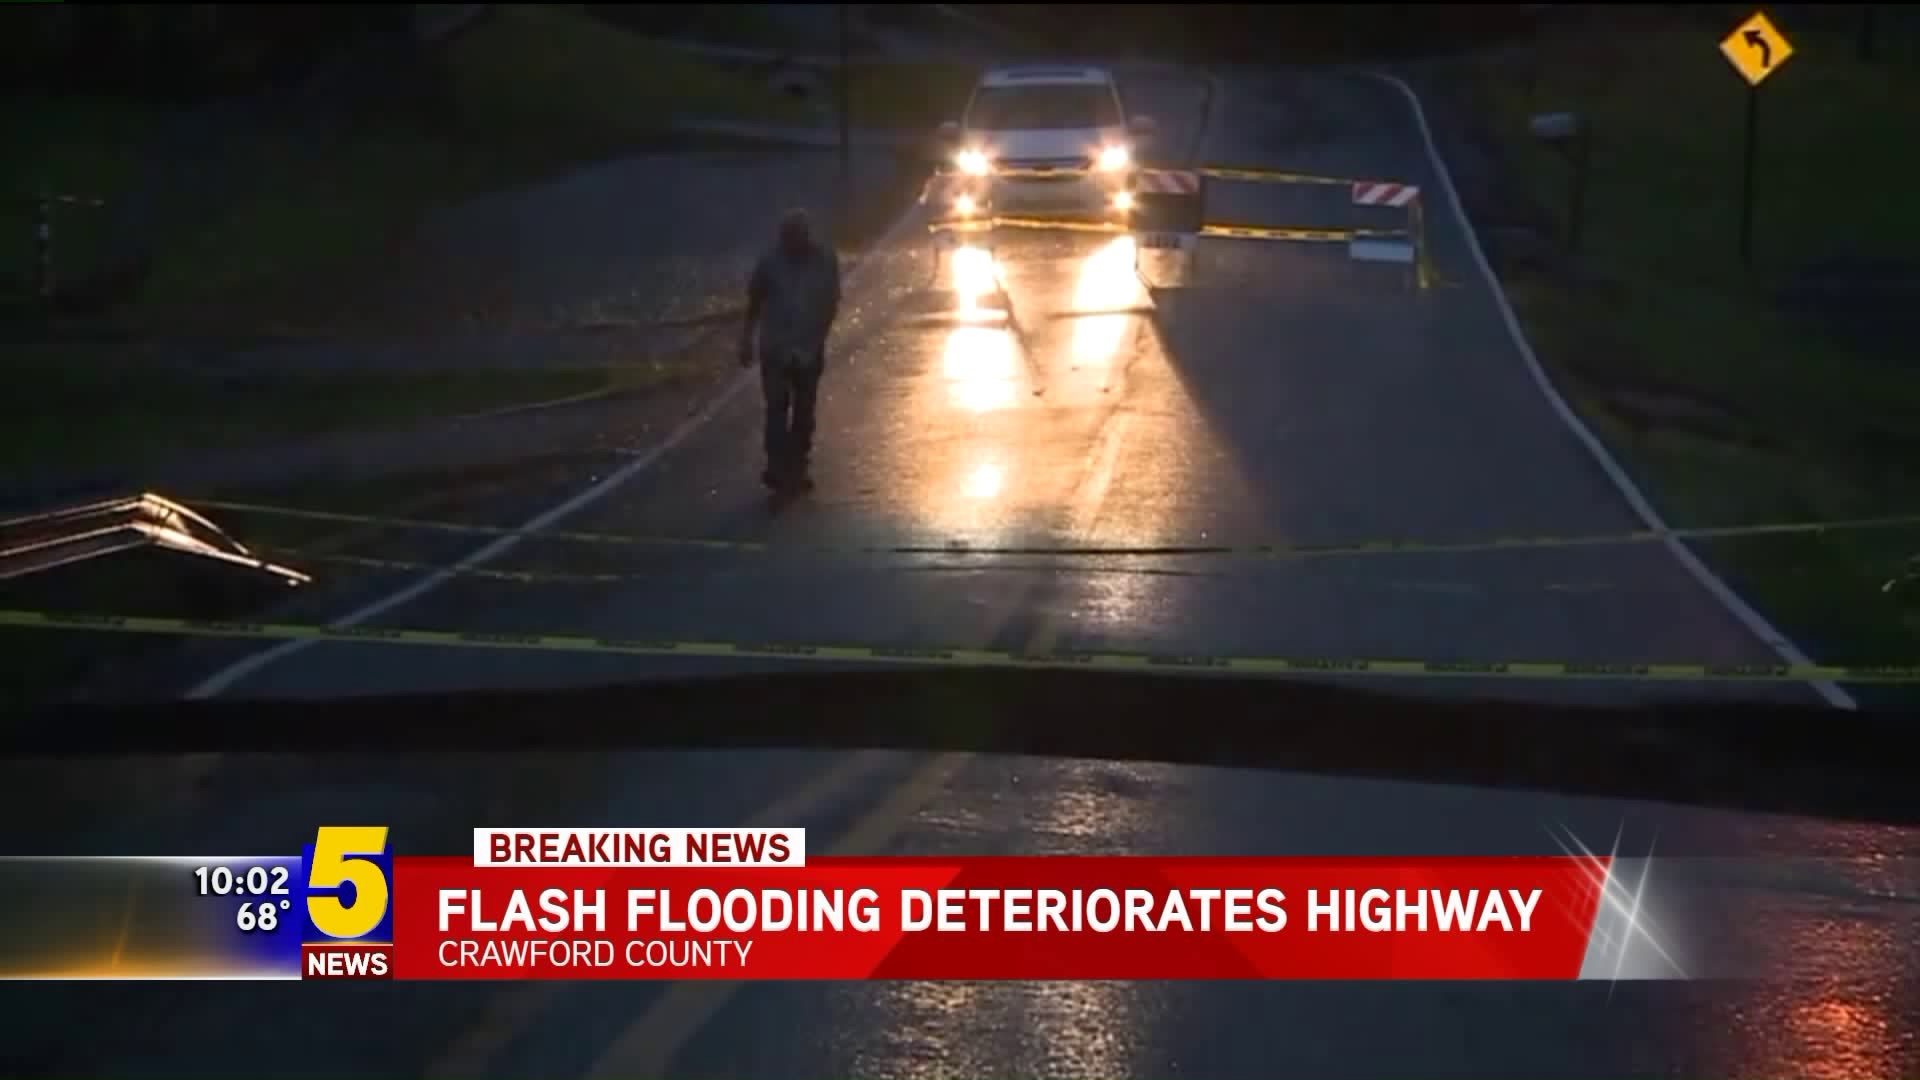 Flash Flooding Deteriorates Highway In Crawford County